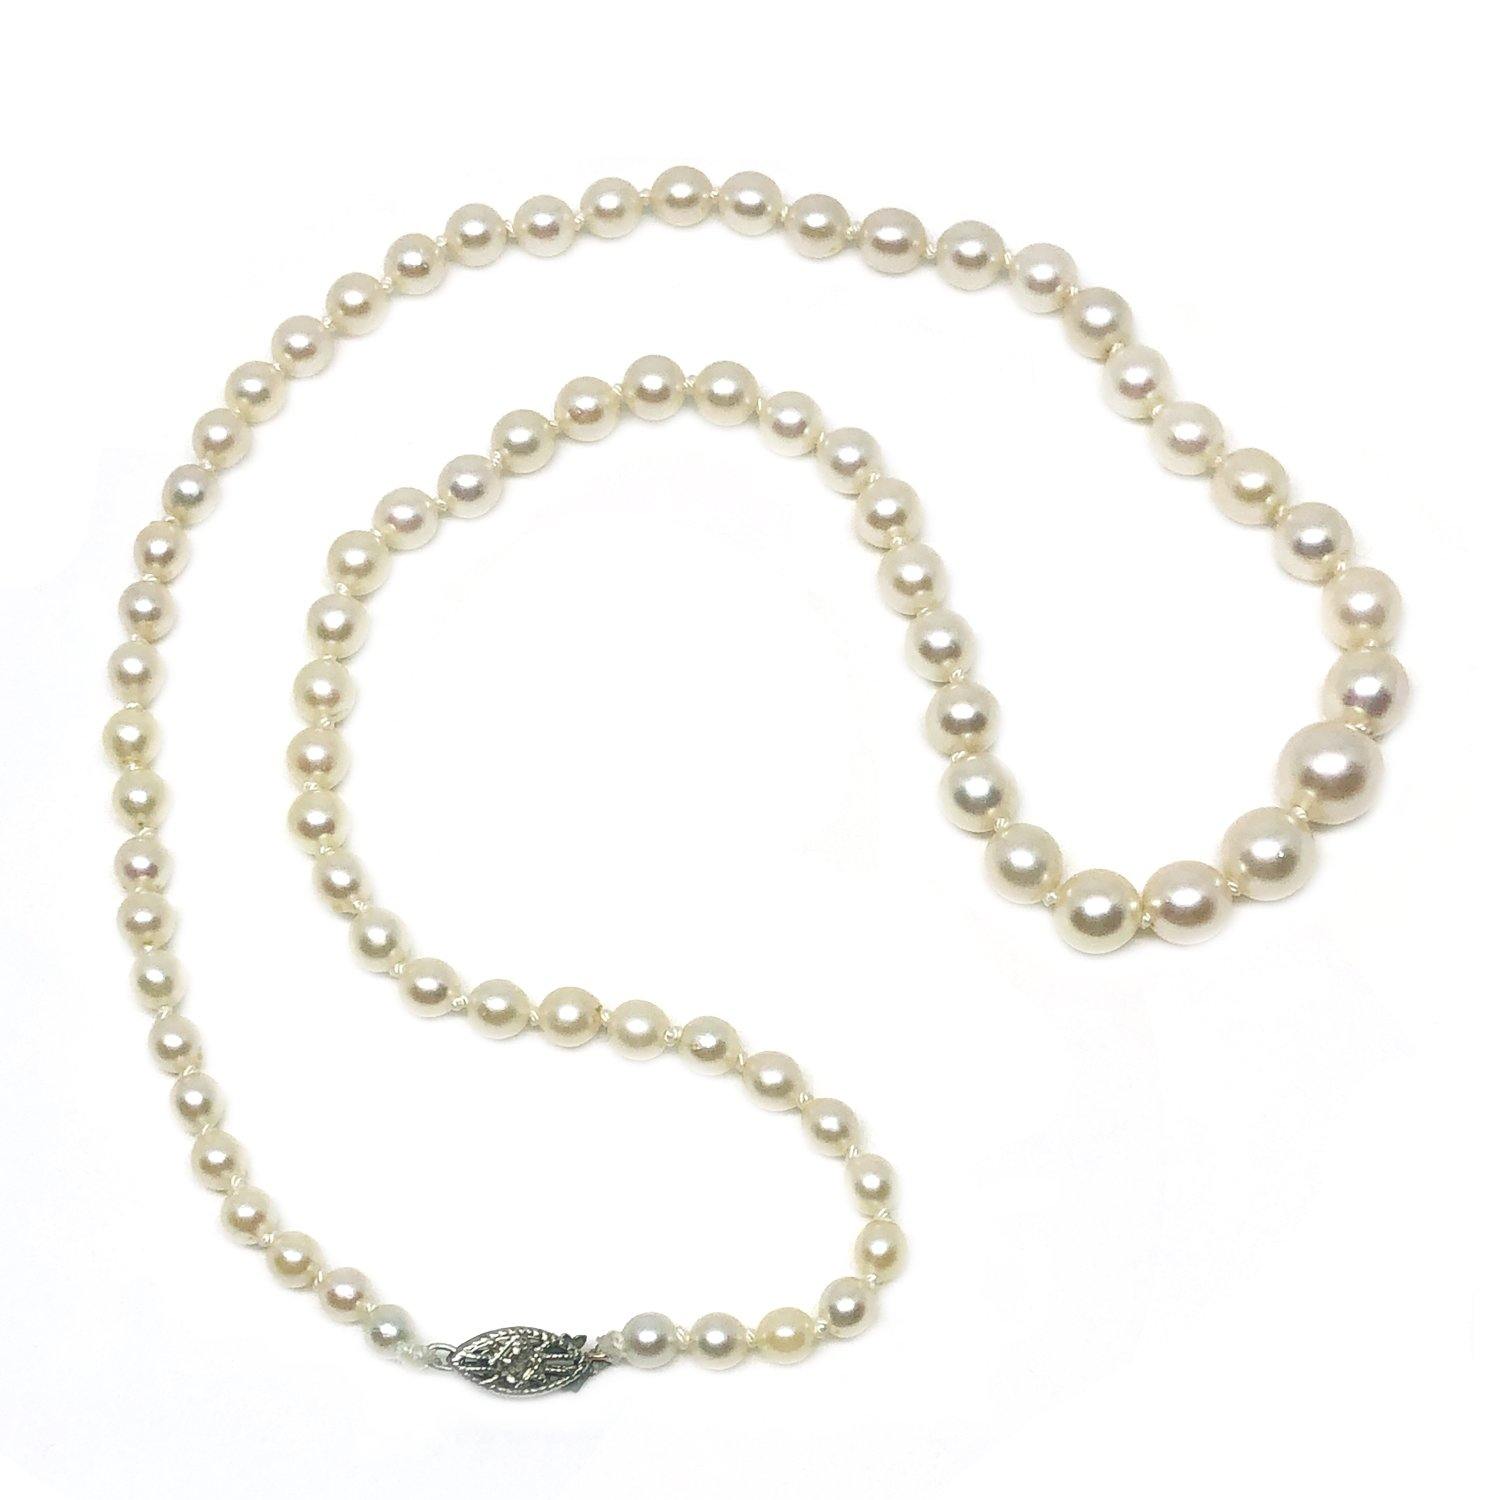 Diamond Graduated Japanese Saltwater Cultured Akoya Pearl Strand - 10K White Gold 18.50 Inch - Vintage Valuable Pearls